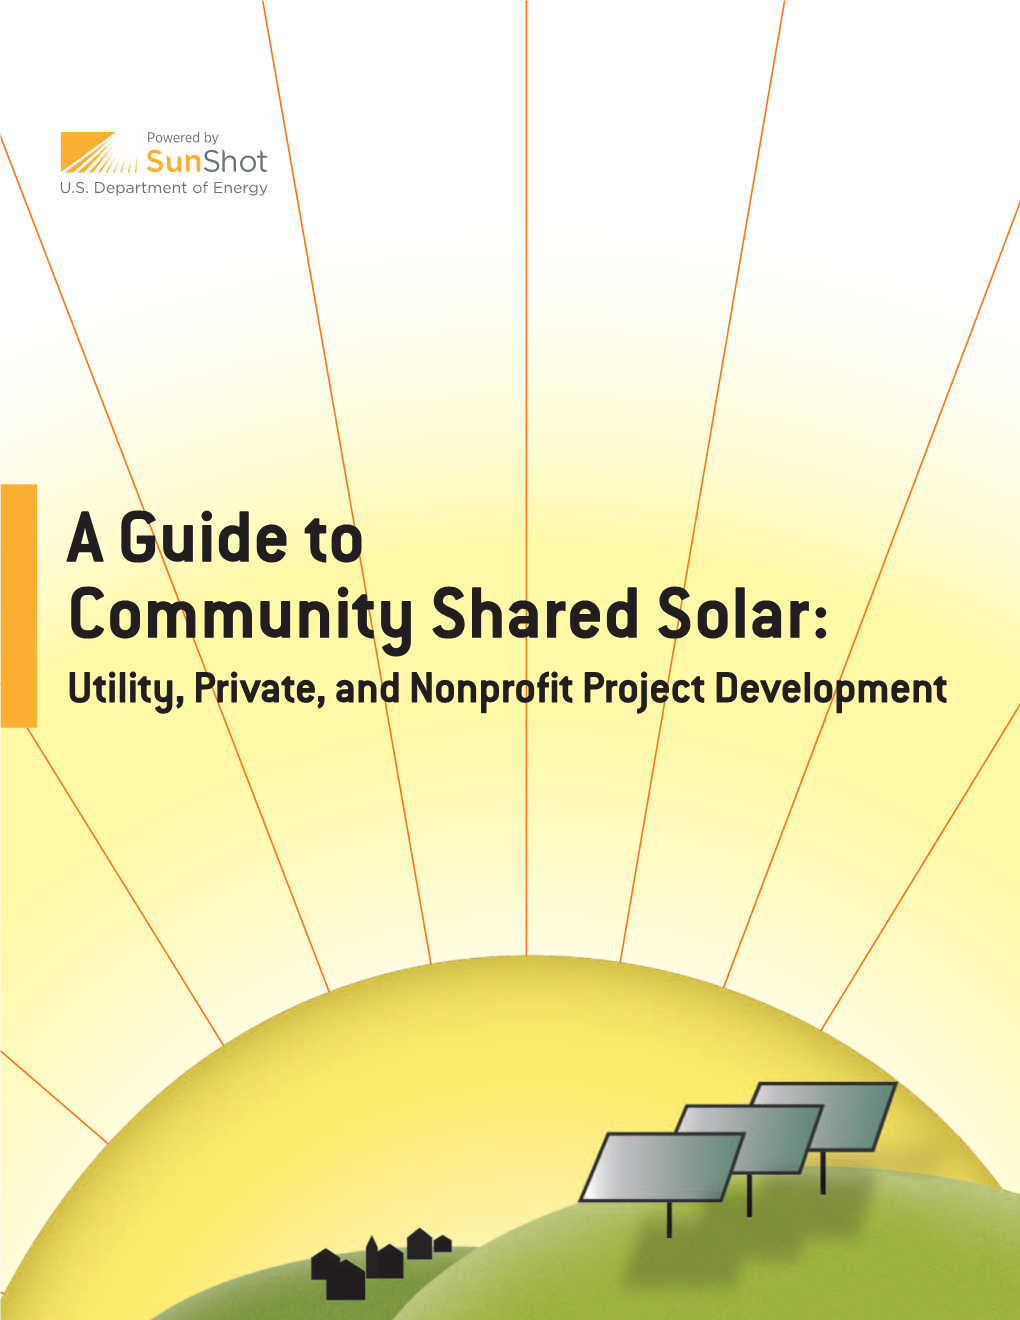 A Guide to Community Shared Solar: Utility, Private, and Nonprofit Project